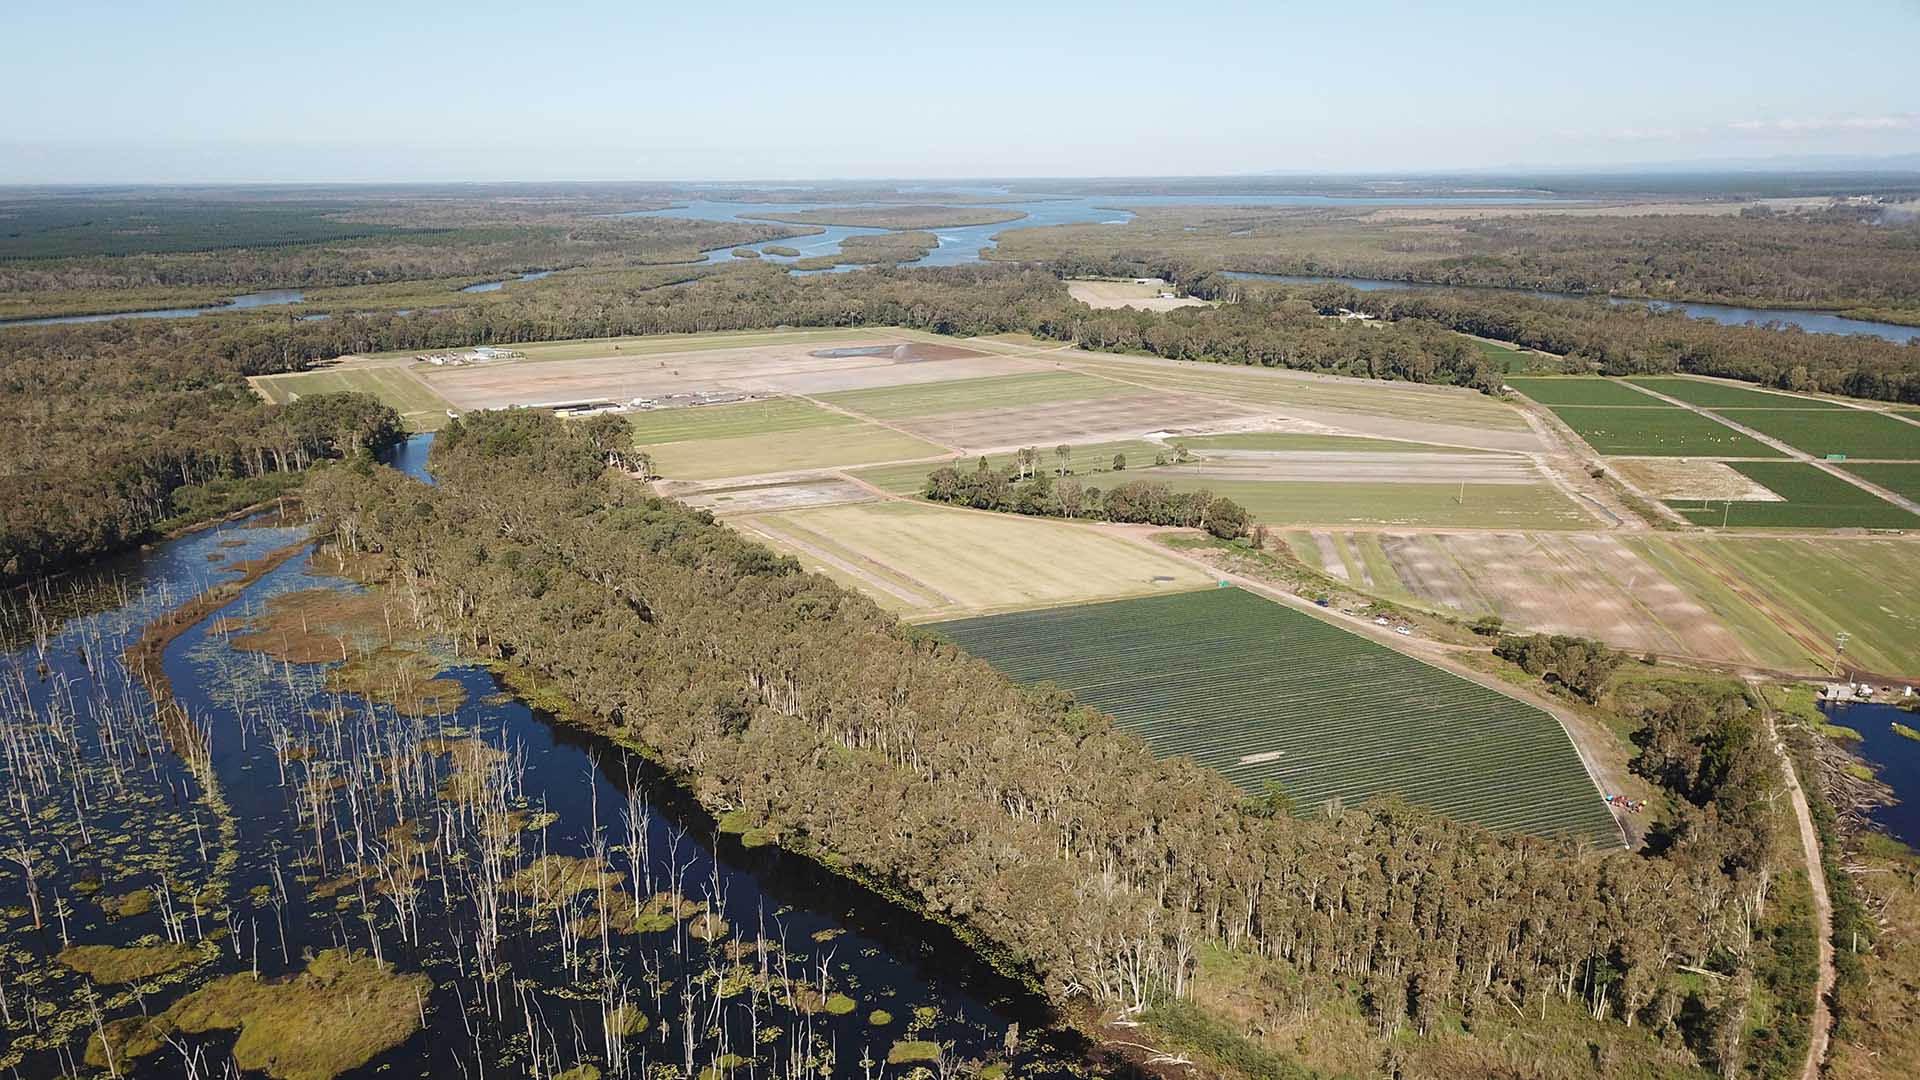 Southeast Queensland Just Scored a New 150-Hectare Site for Major Music and Camping Festivals